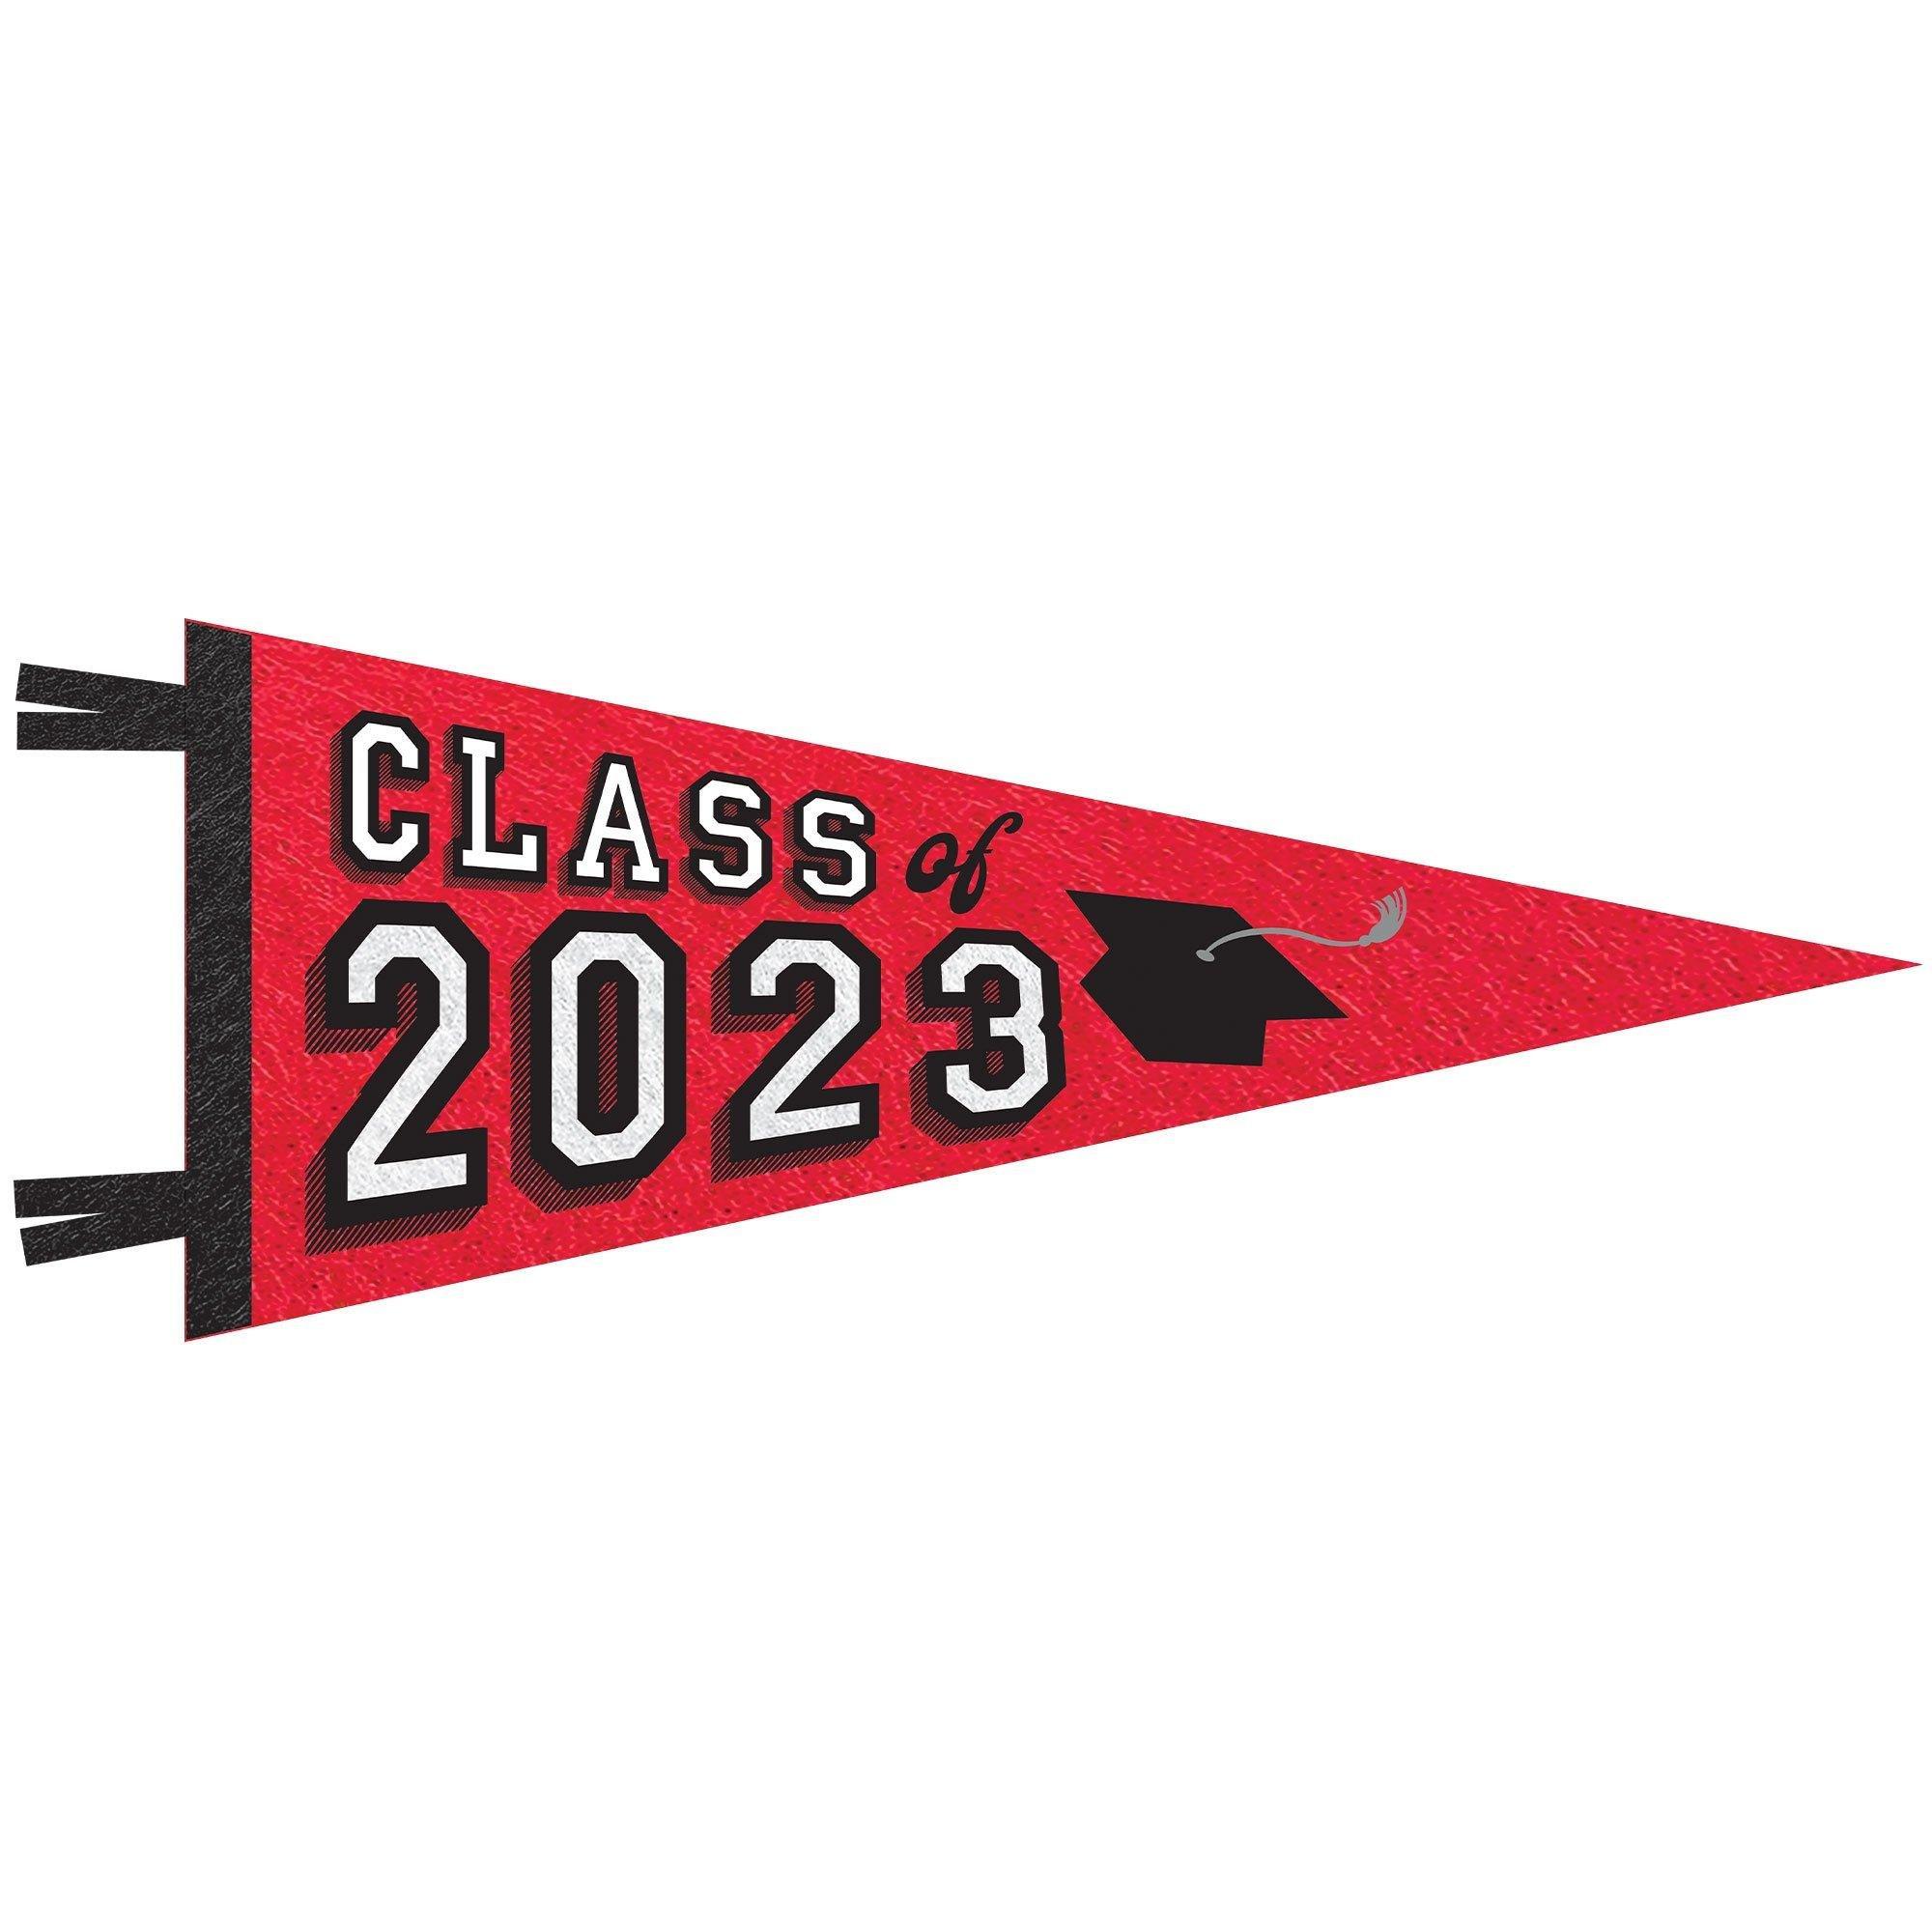 Graduation Party Outdoor Decorations Kit with Banners, Balloons, Yard Signs - Red 2024 Congrats Grad